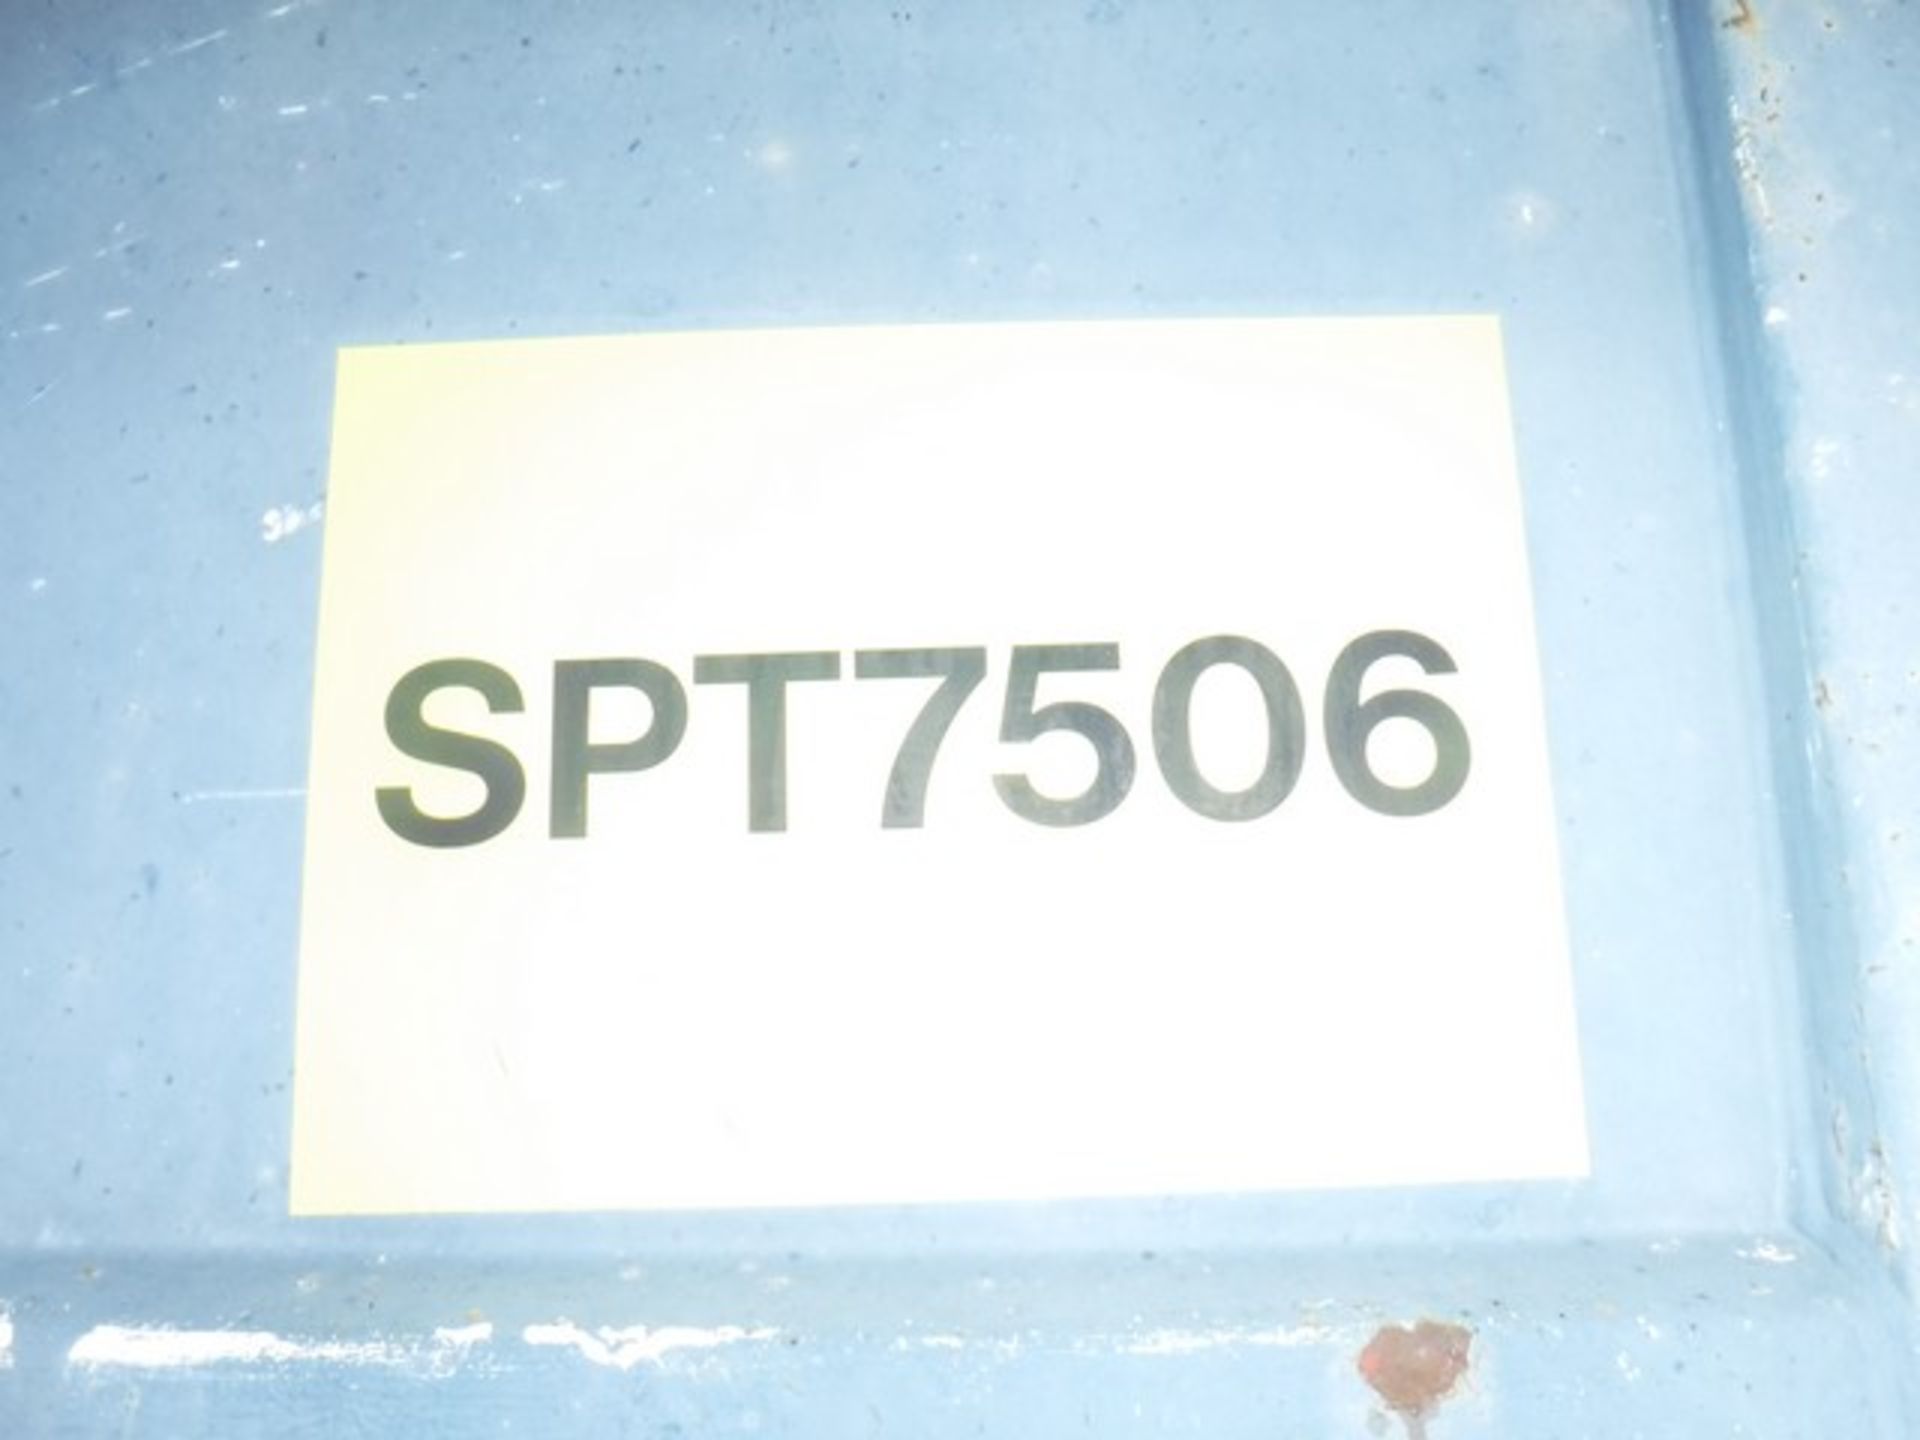 SHIPPING CONTAINER 20FT AN - SPT7506 - Image 6 of 6